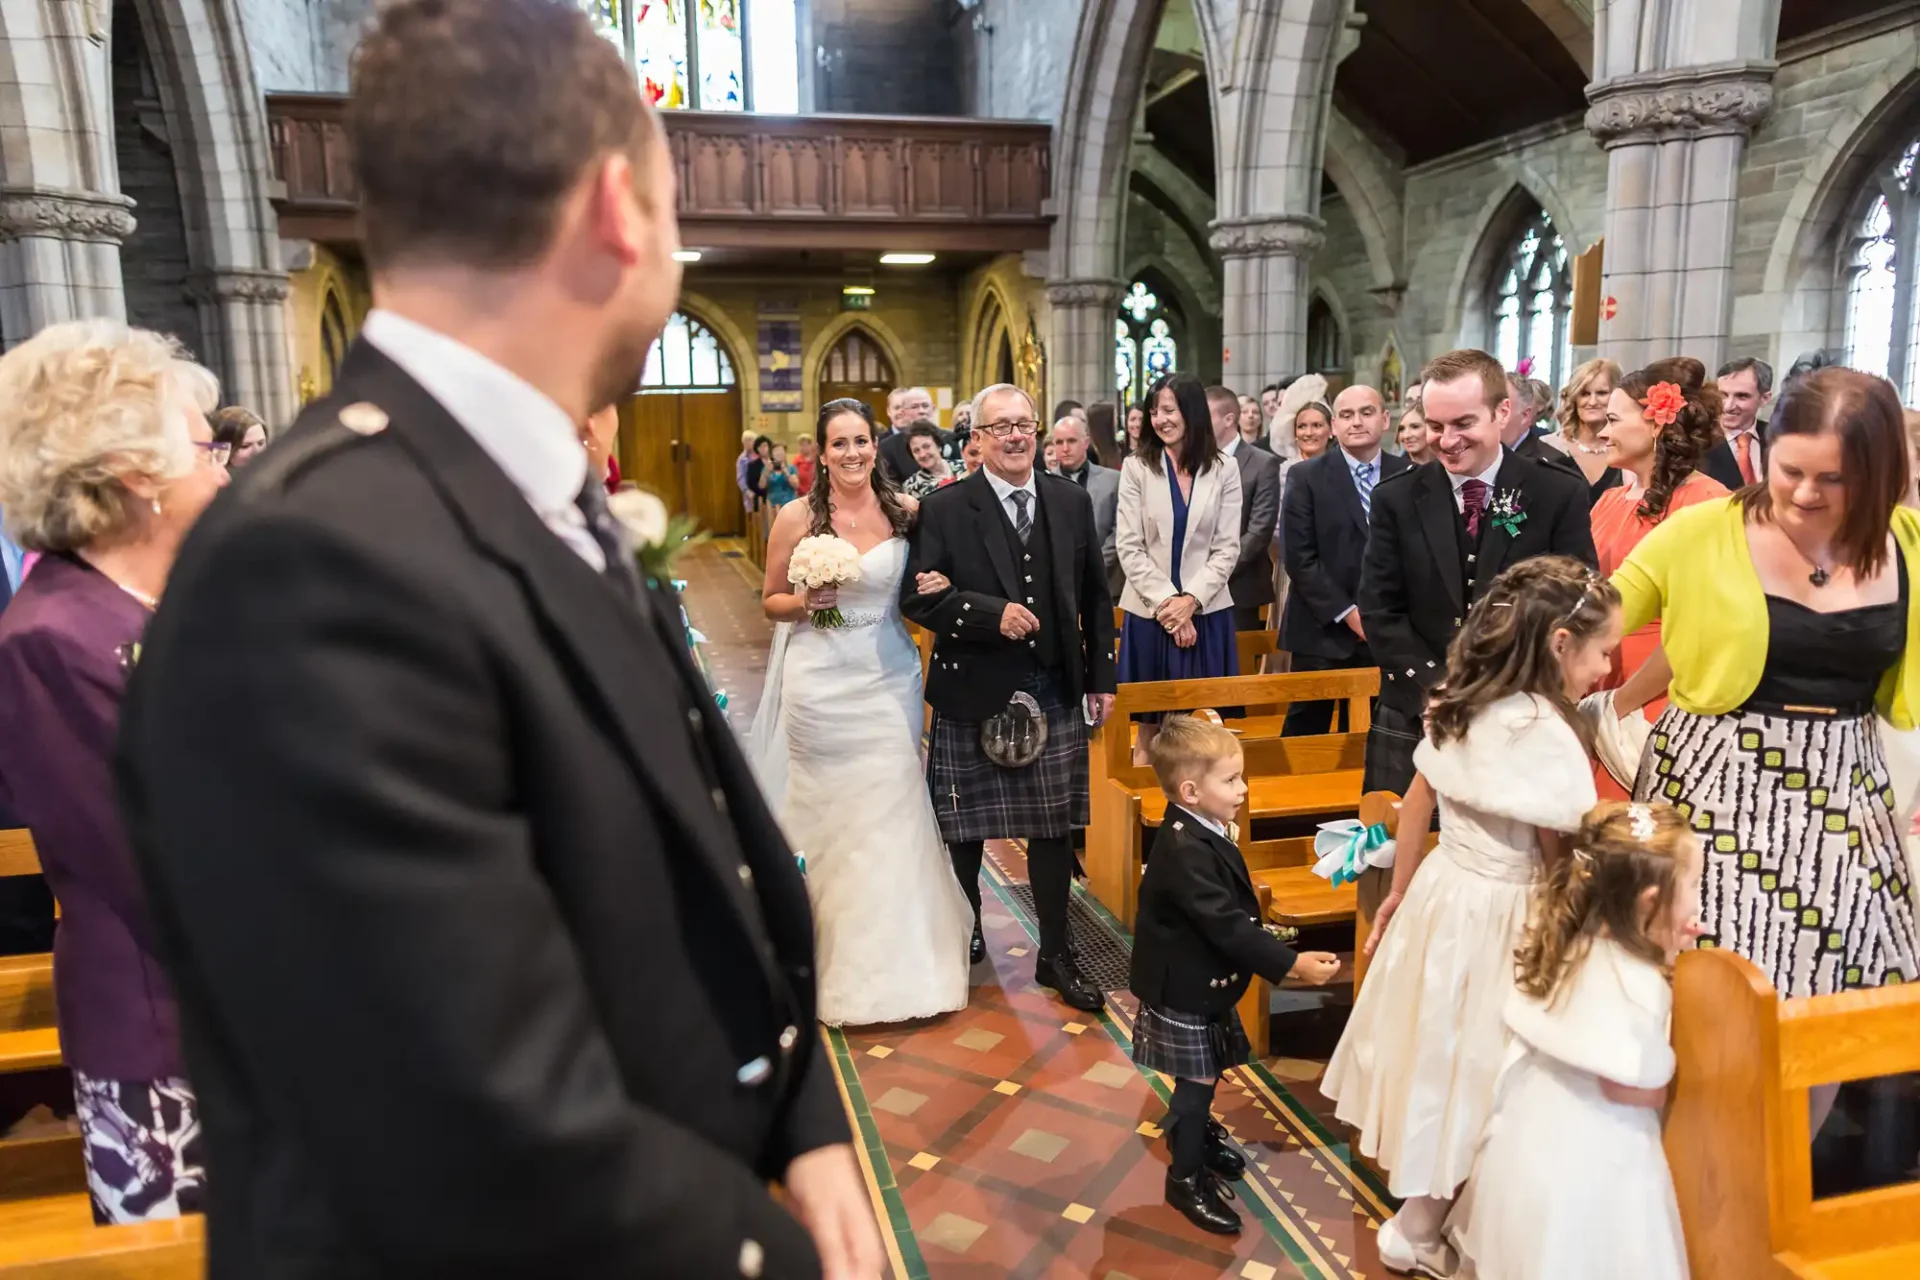 Bride walking down the aisle with her father in a church, as guests watch and a groom awaits at the altar, some wearing traditional scottish attire.